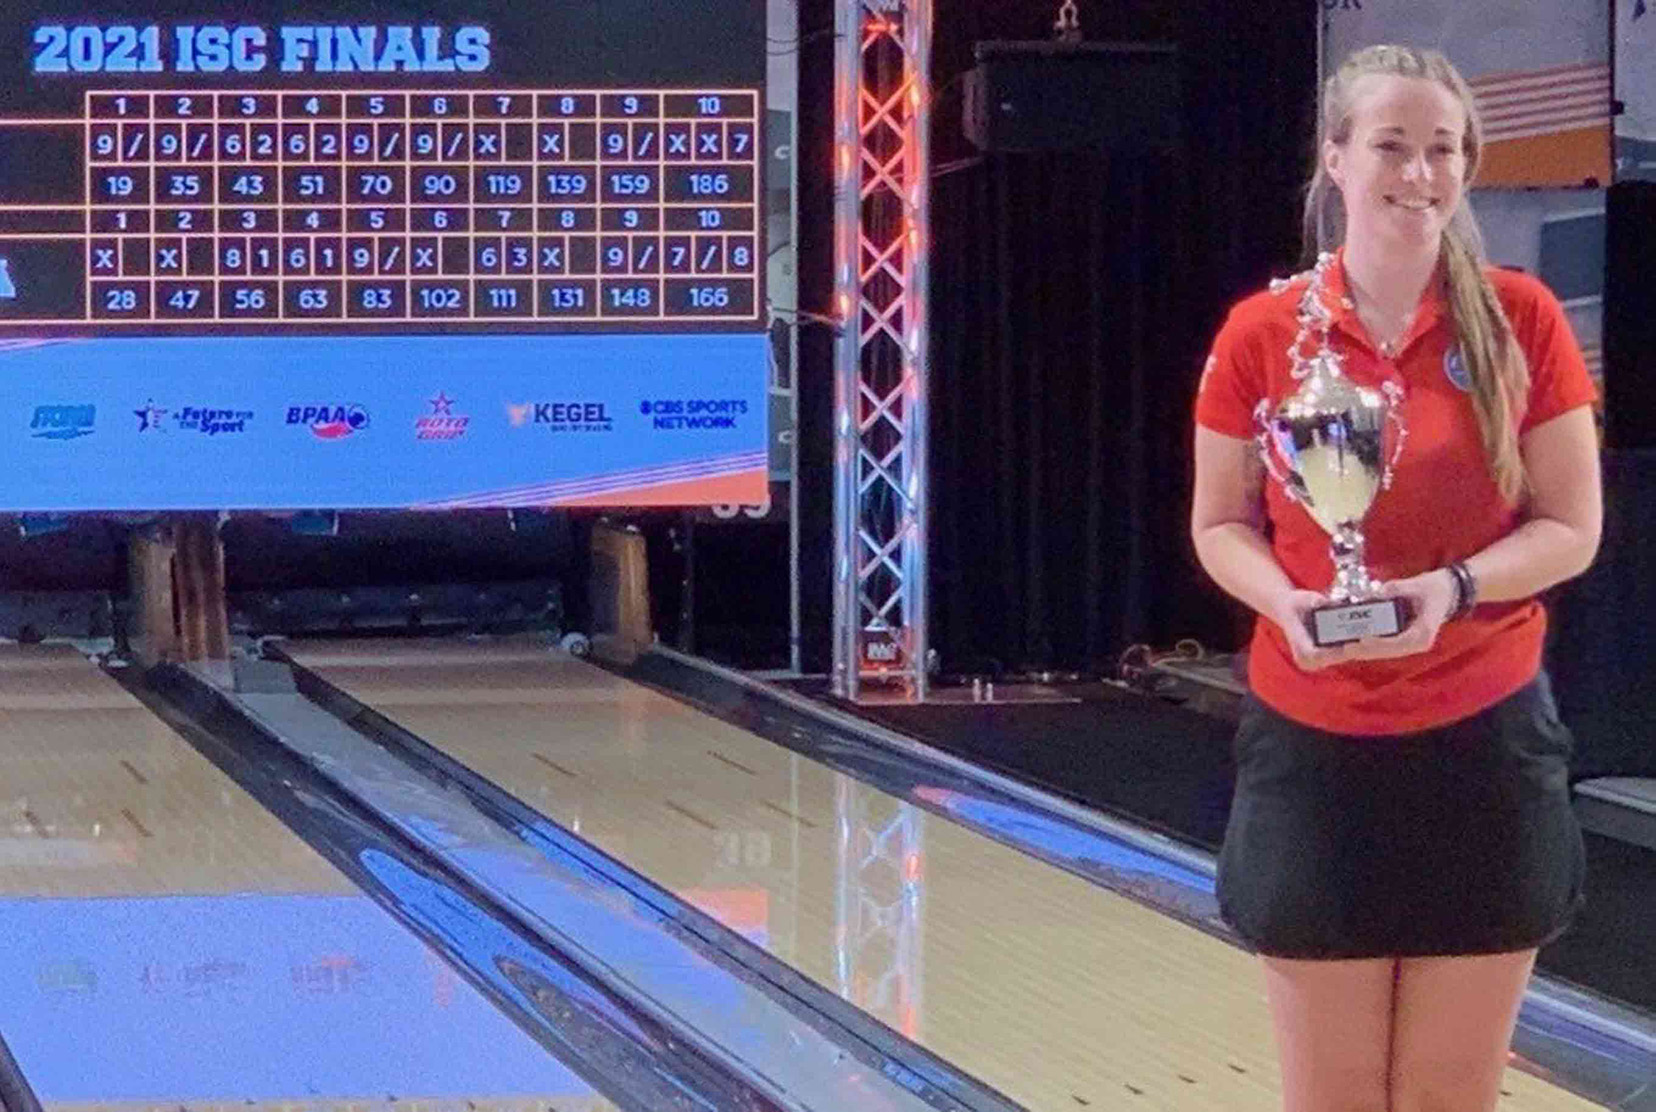 Katie Robb, a junior on the Lady Hornet Bowling team, captured the 2021 U.S. Bowling Congress Intercollegiate Singles National Championship on May 8 in Wyoming, Mich. She is the first-ever national champion in Delaware State University athletics history.